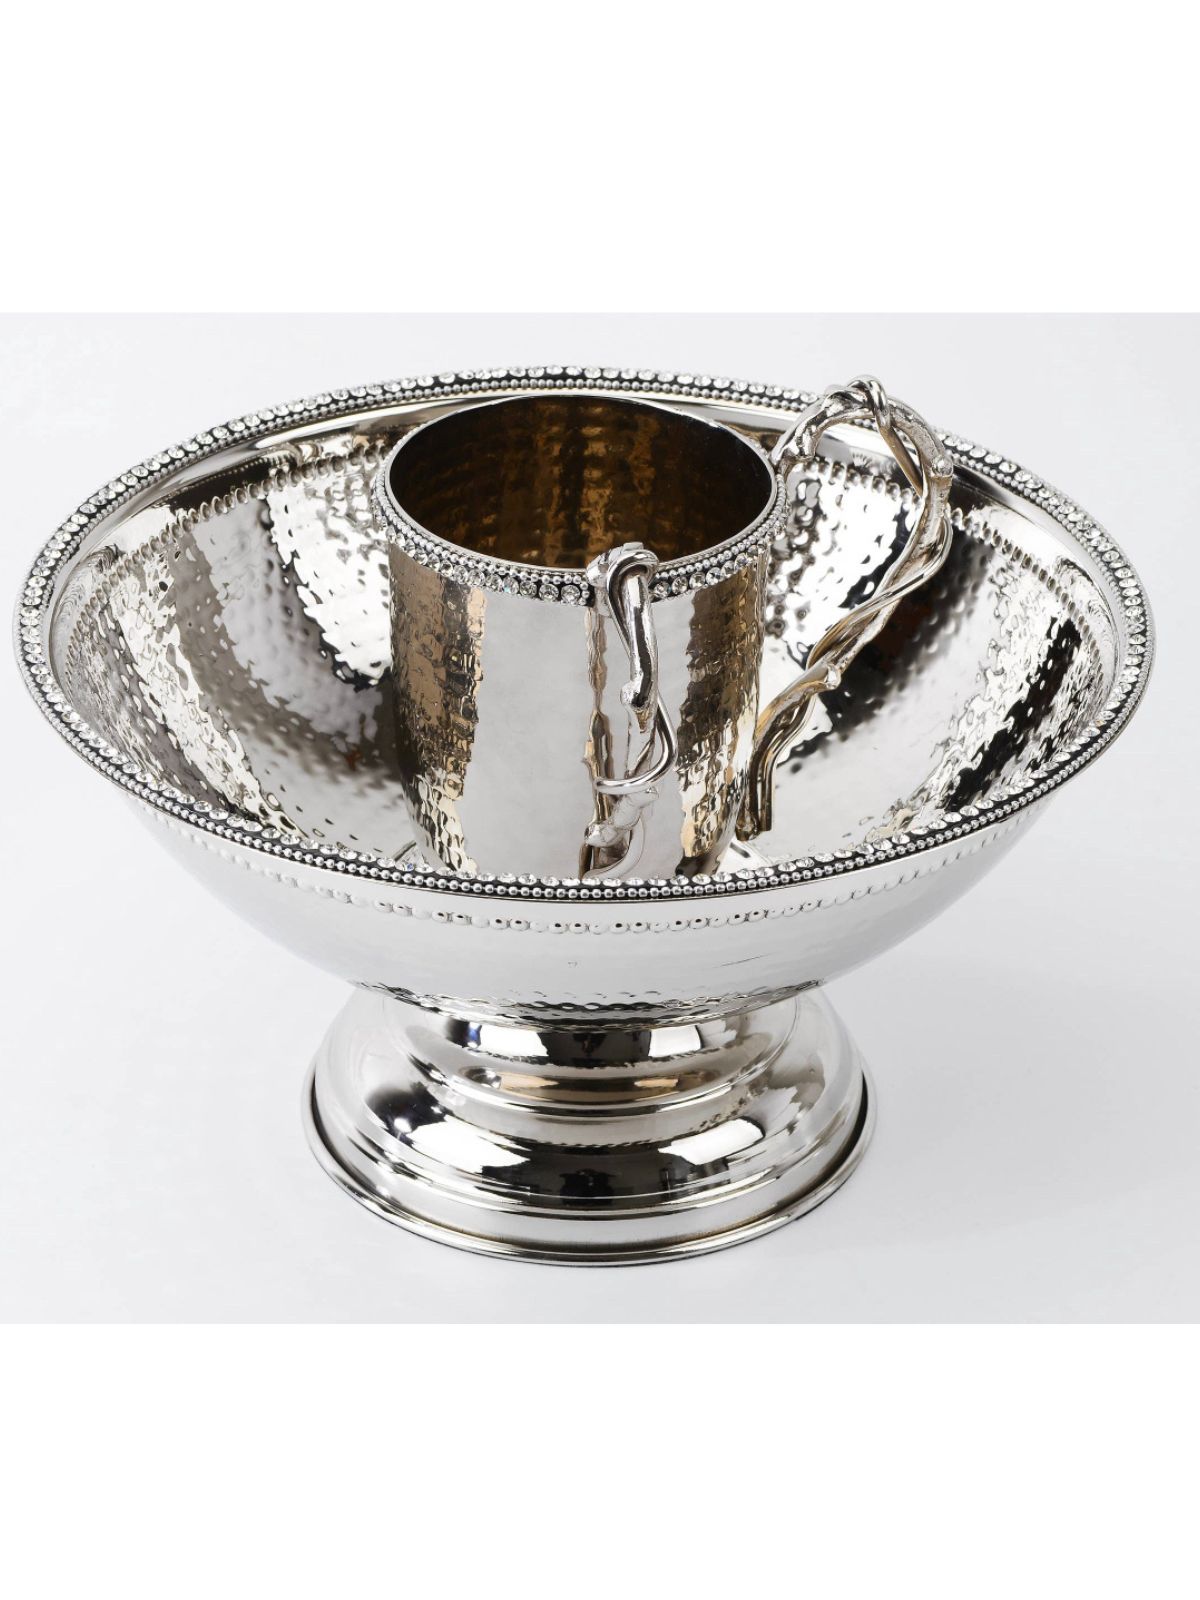 The stately Stainless Steel Wash Cup is composed of fine hammered stainless steel trimmed with exquisite diamonds